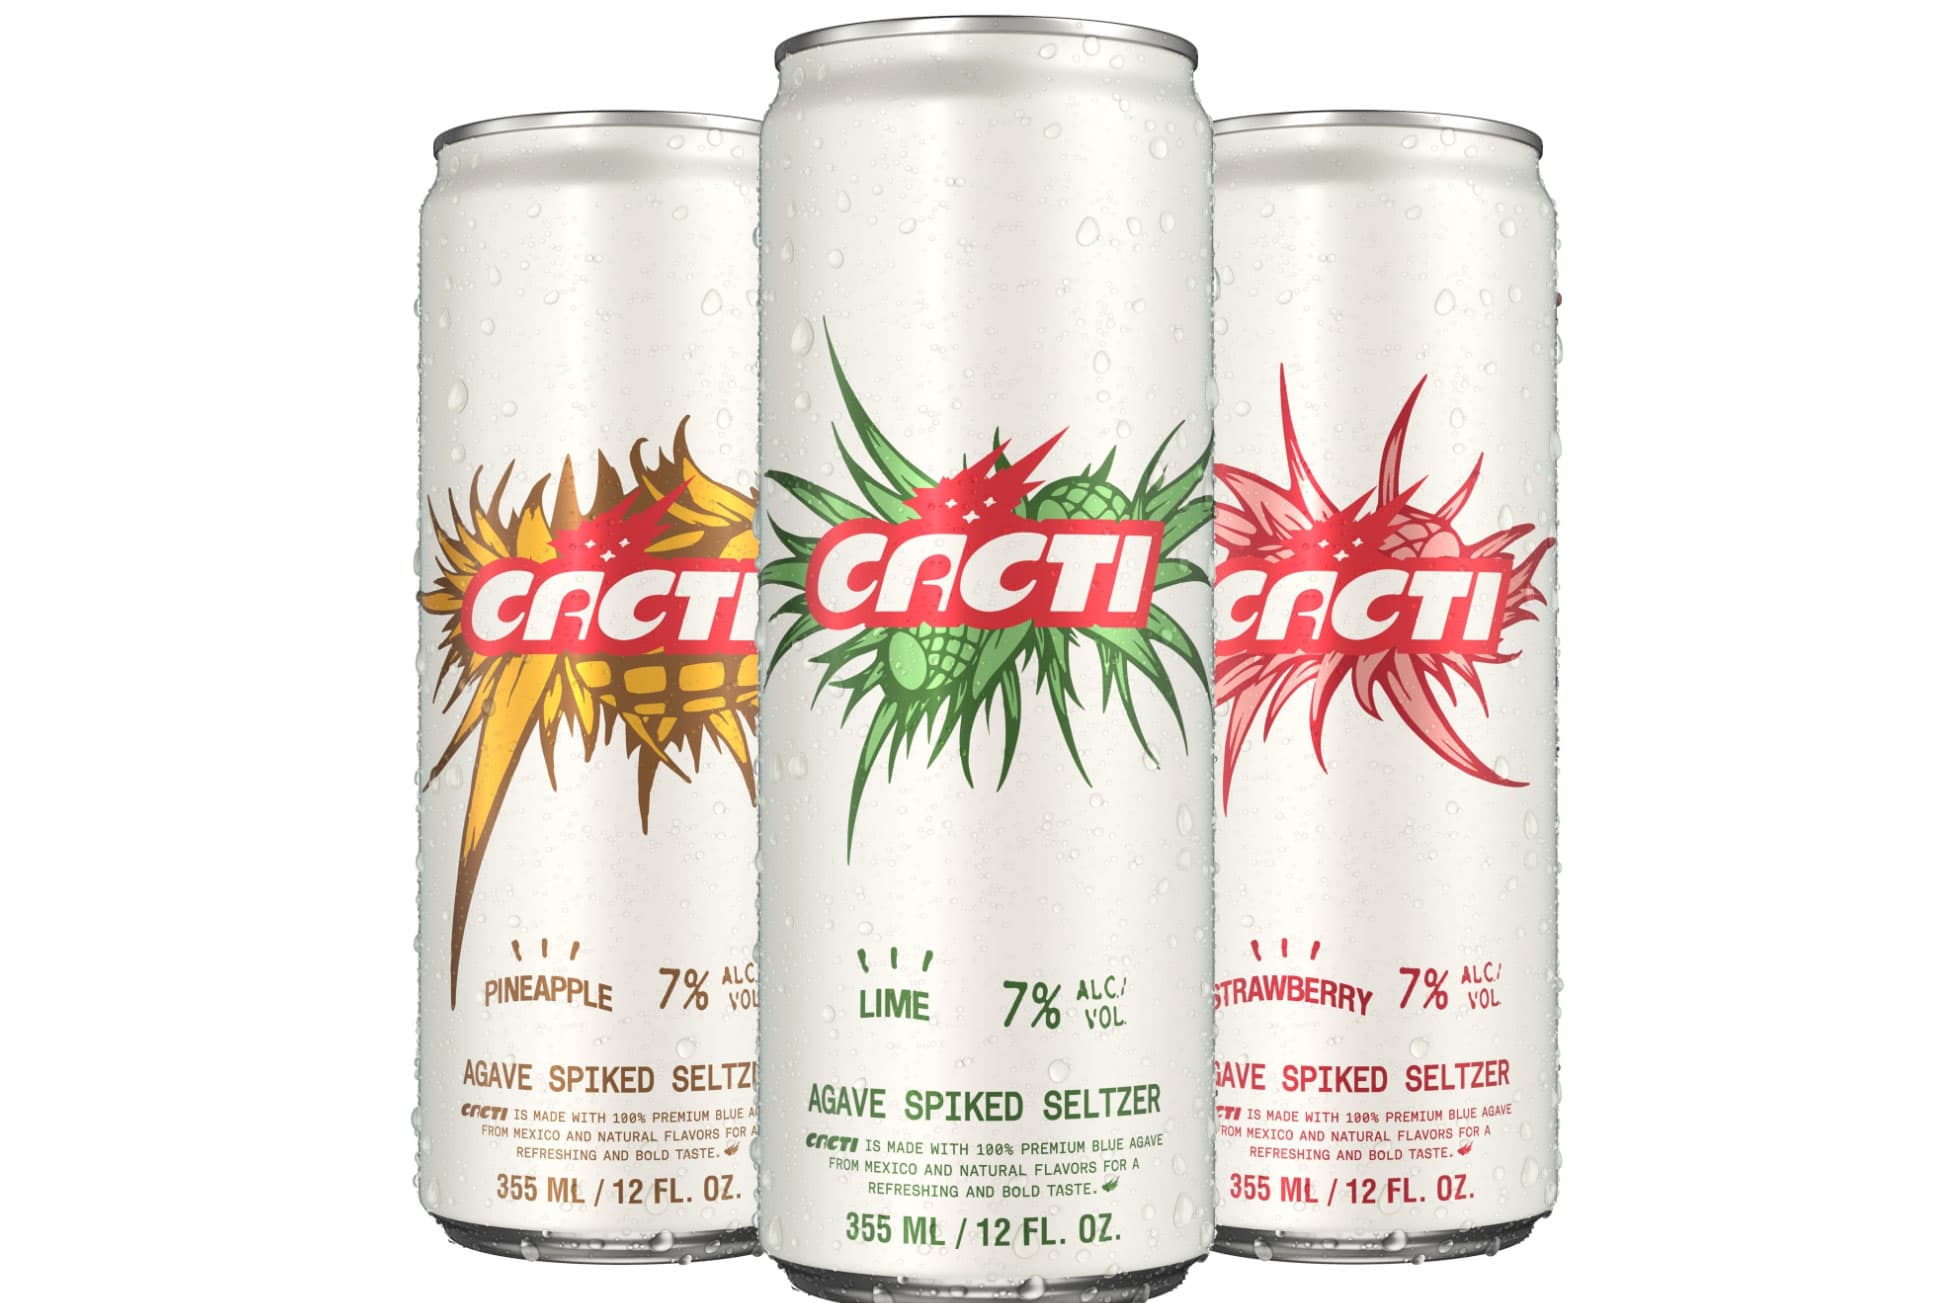 Anheuser-Busch CEO on the success of the Cacti hard seltzer backed by Travis Scott